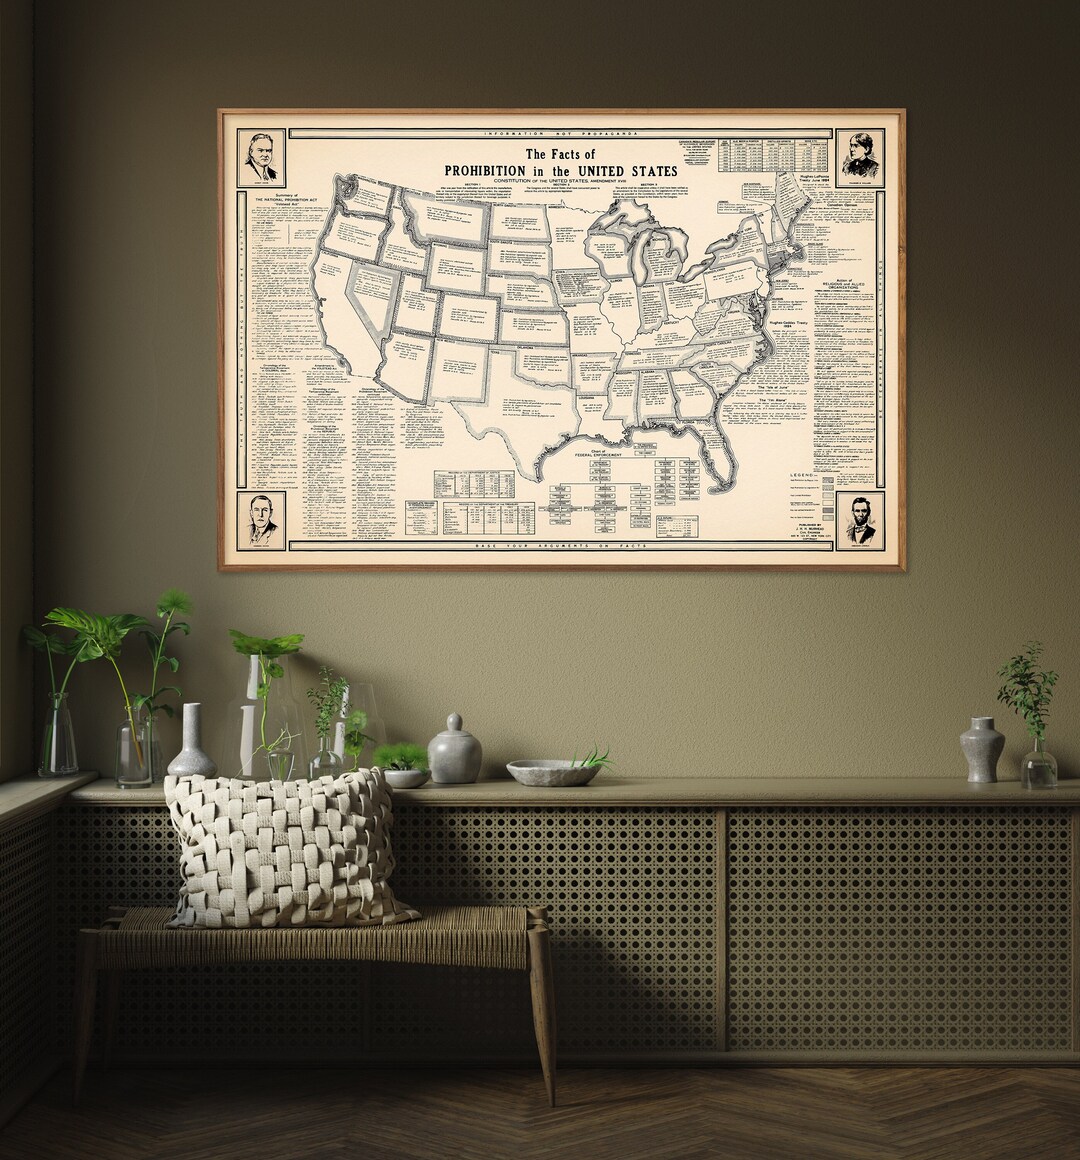 Facts of Prohibition Vintage Chart Print US Prohibition Map - Etsy